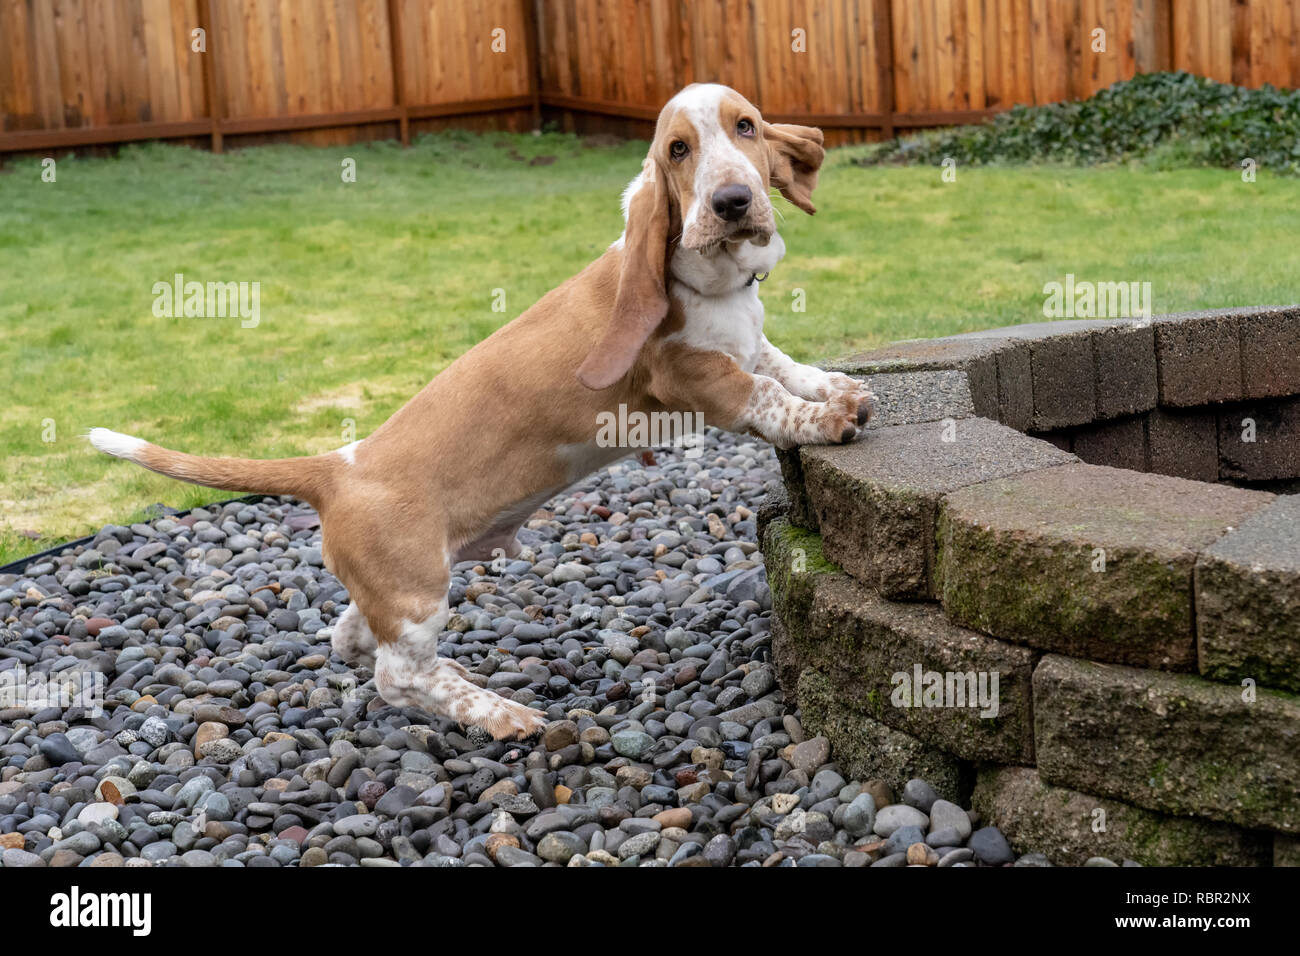 Renton, Washington, USA.  Five month old Basset Hound puppy 'Elvis' posing with his front legs on an outside fire circle. Stock Photo